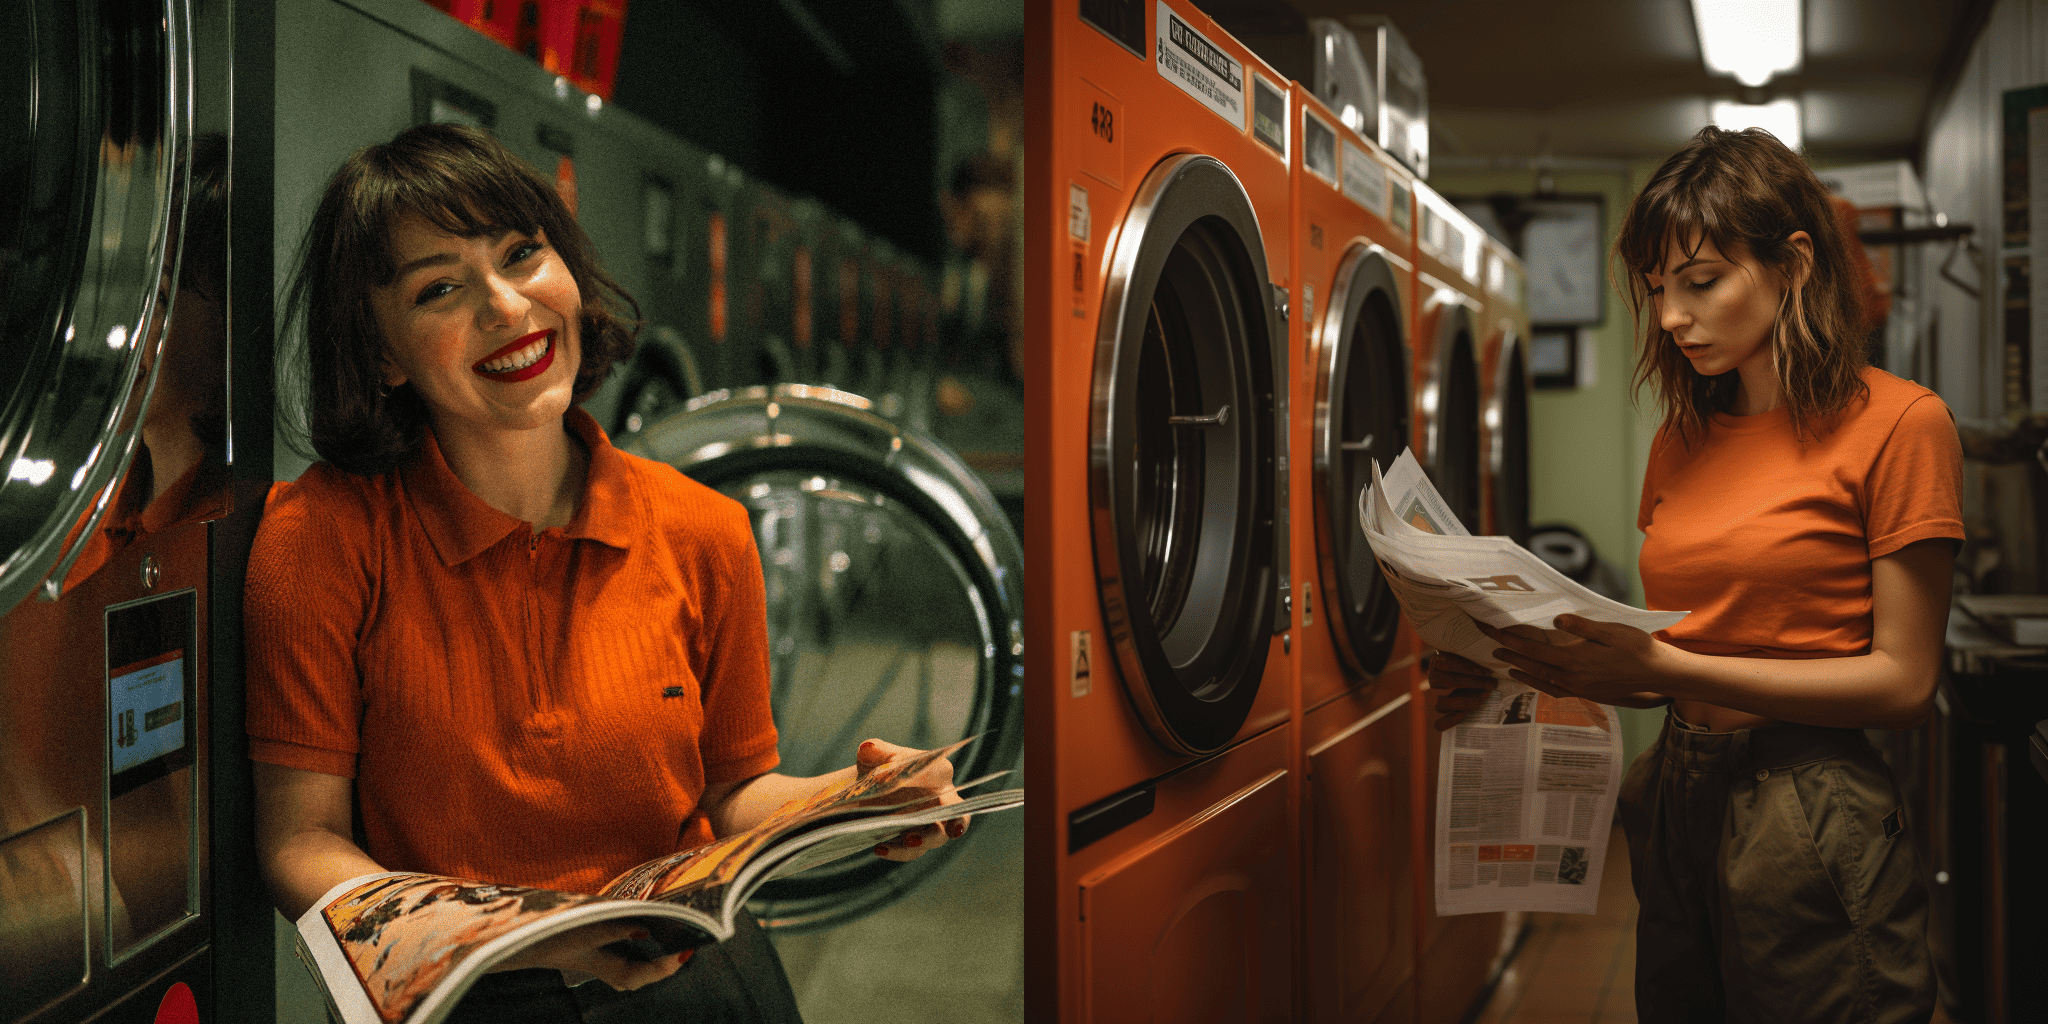 The Woman in the Laundromat